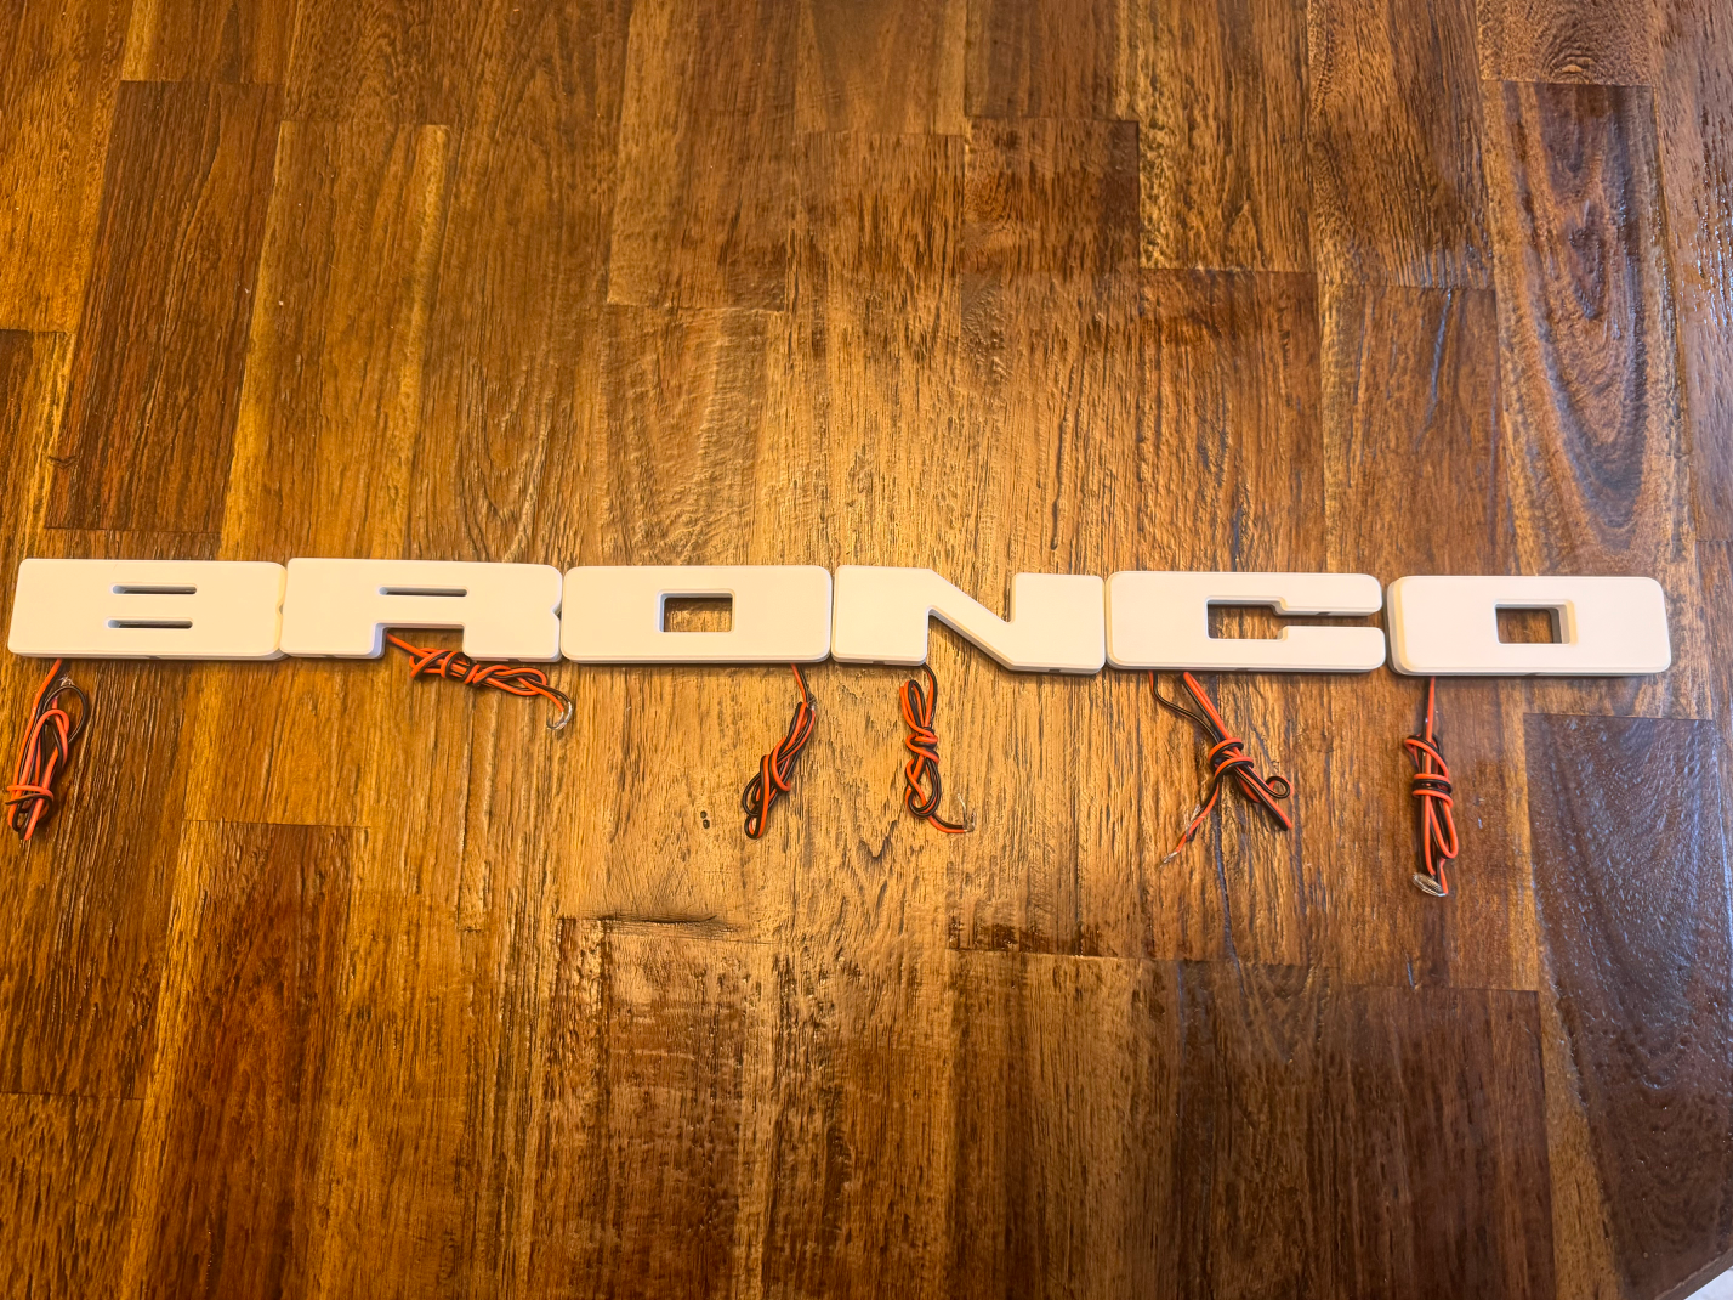 Ford Bronco Bronco led light up letters for grill. New asking $250 shipped IMG_3318